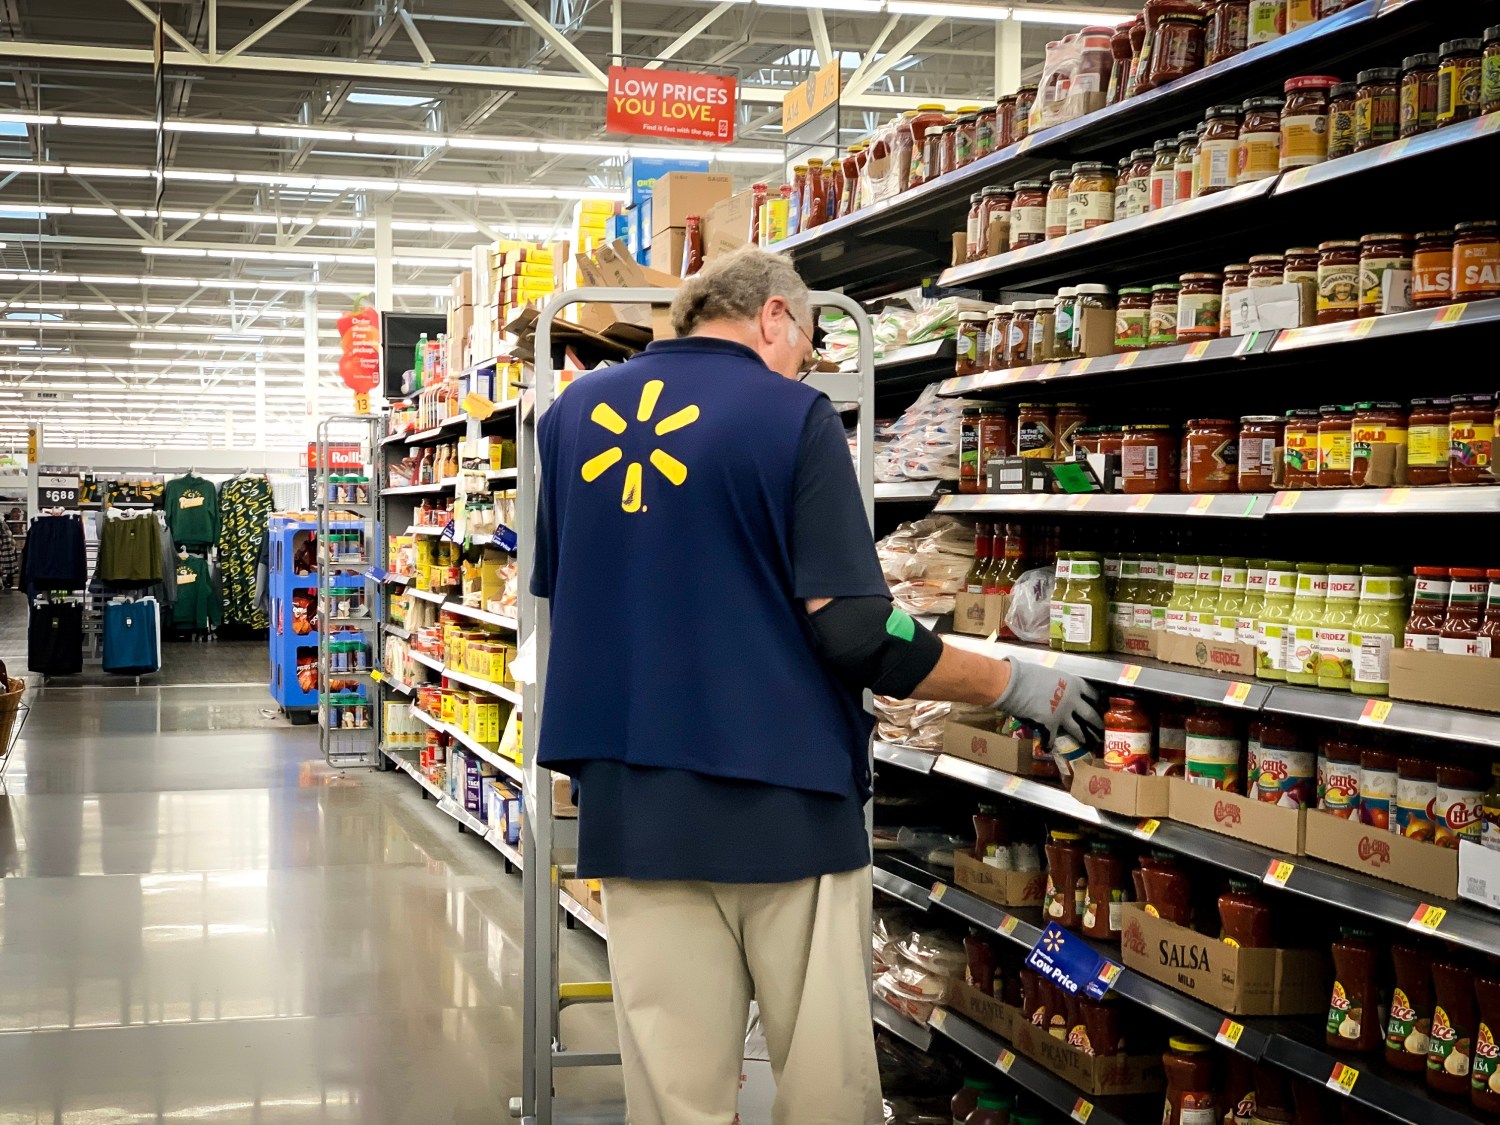 Amazon and Walmart have raked in billions in additional profits during